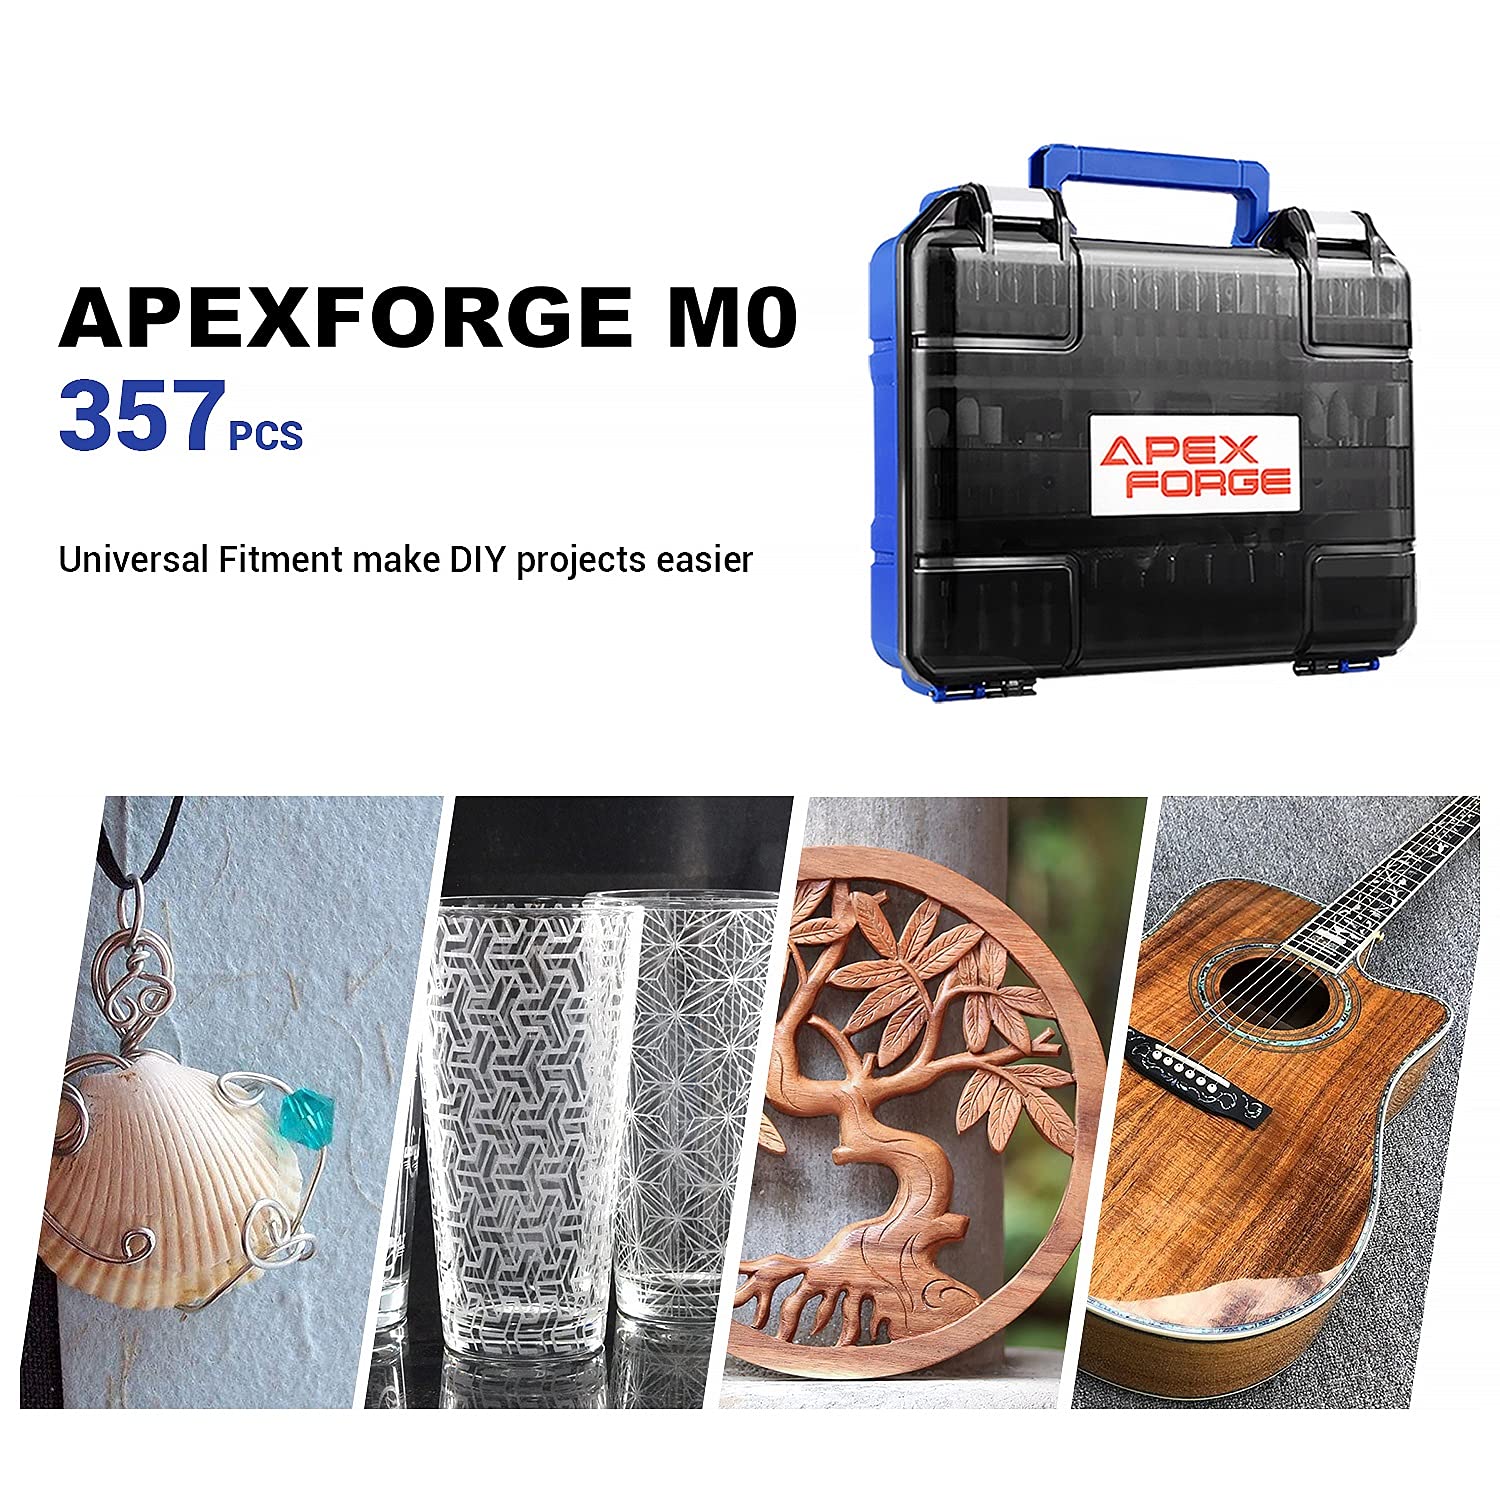 APEXFORGE M0 Rotary Tool Accessories Kit, 357 Pcs Accessories, 1/8"(3.2mm) Diameter Shanks, Universal Fitment for Easy Cutting, Sanding, Grinding, Drilling, and Engraving (Rotary Tool Not Included)